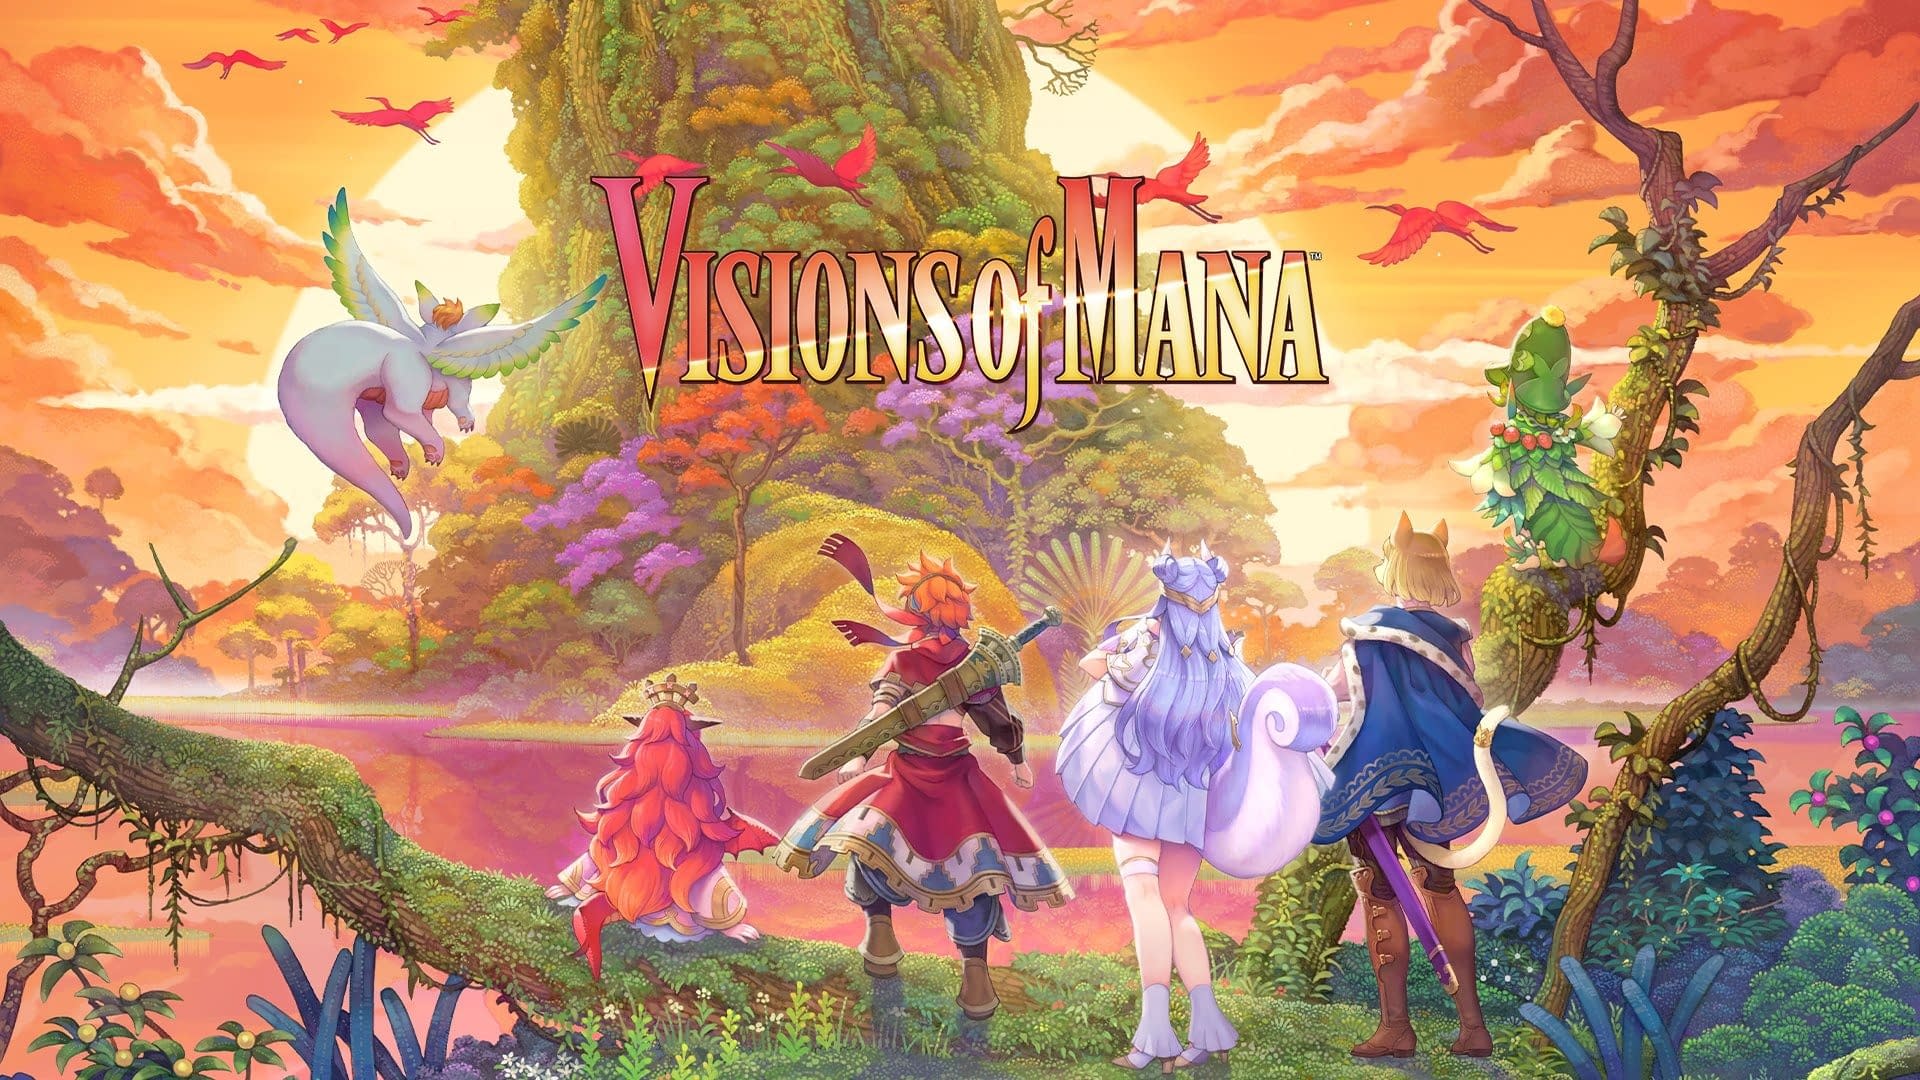 Visions of Mana, which will offer Square Enix, can come to Game Pass